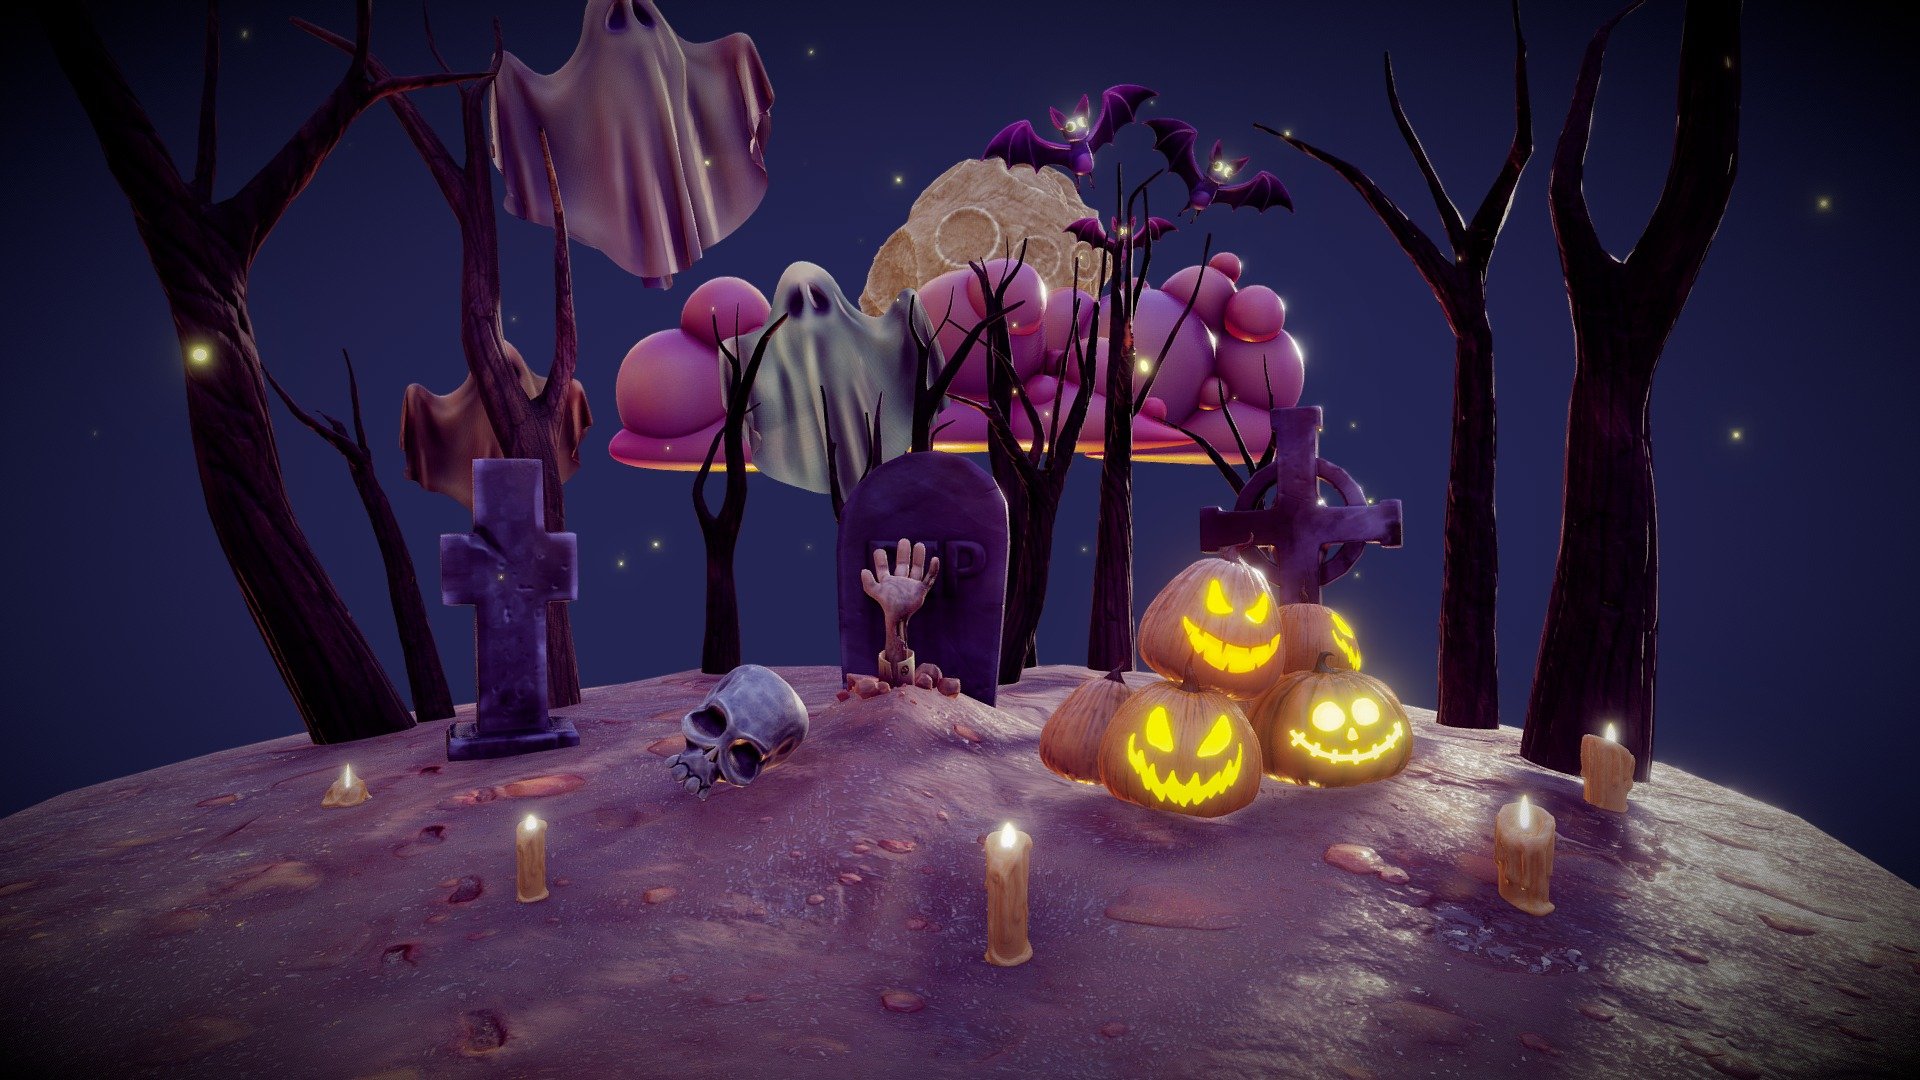 1 Ground

3 Candles

1 Skull

1 Bat 3 Textures

1 Zombie Hand

3 Pumpkins 6 Textures

3 Headstones

1 Ghosts 3 Textures

3 Clouds

1 Moon 

3 Trees
 - Halloween Collection - Buy Royalty Free 3D model by msanjurj 3d model